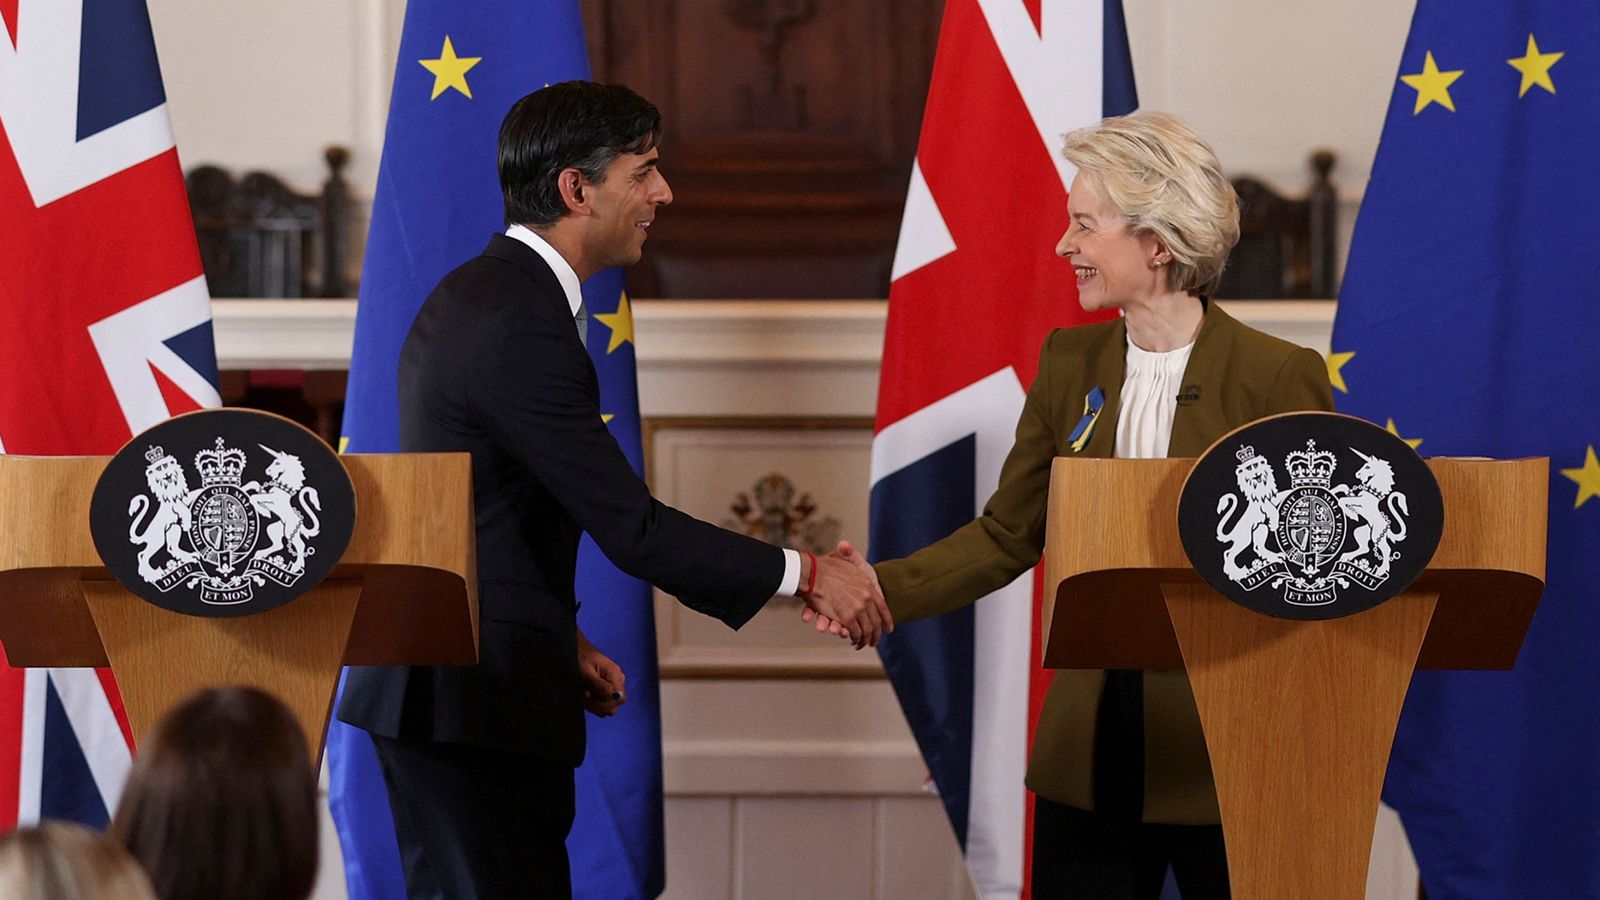 Rishi Sunak promises 'beginning of a new chapter' as he unveils 'Windsor Framework' deal on Brexit